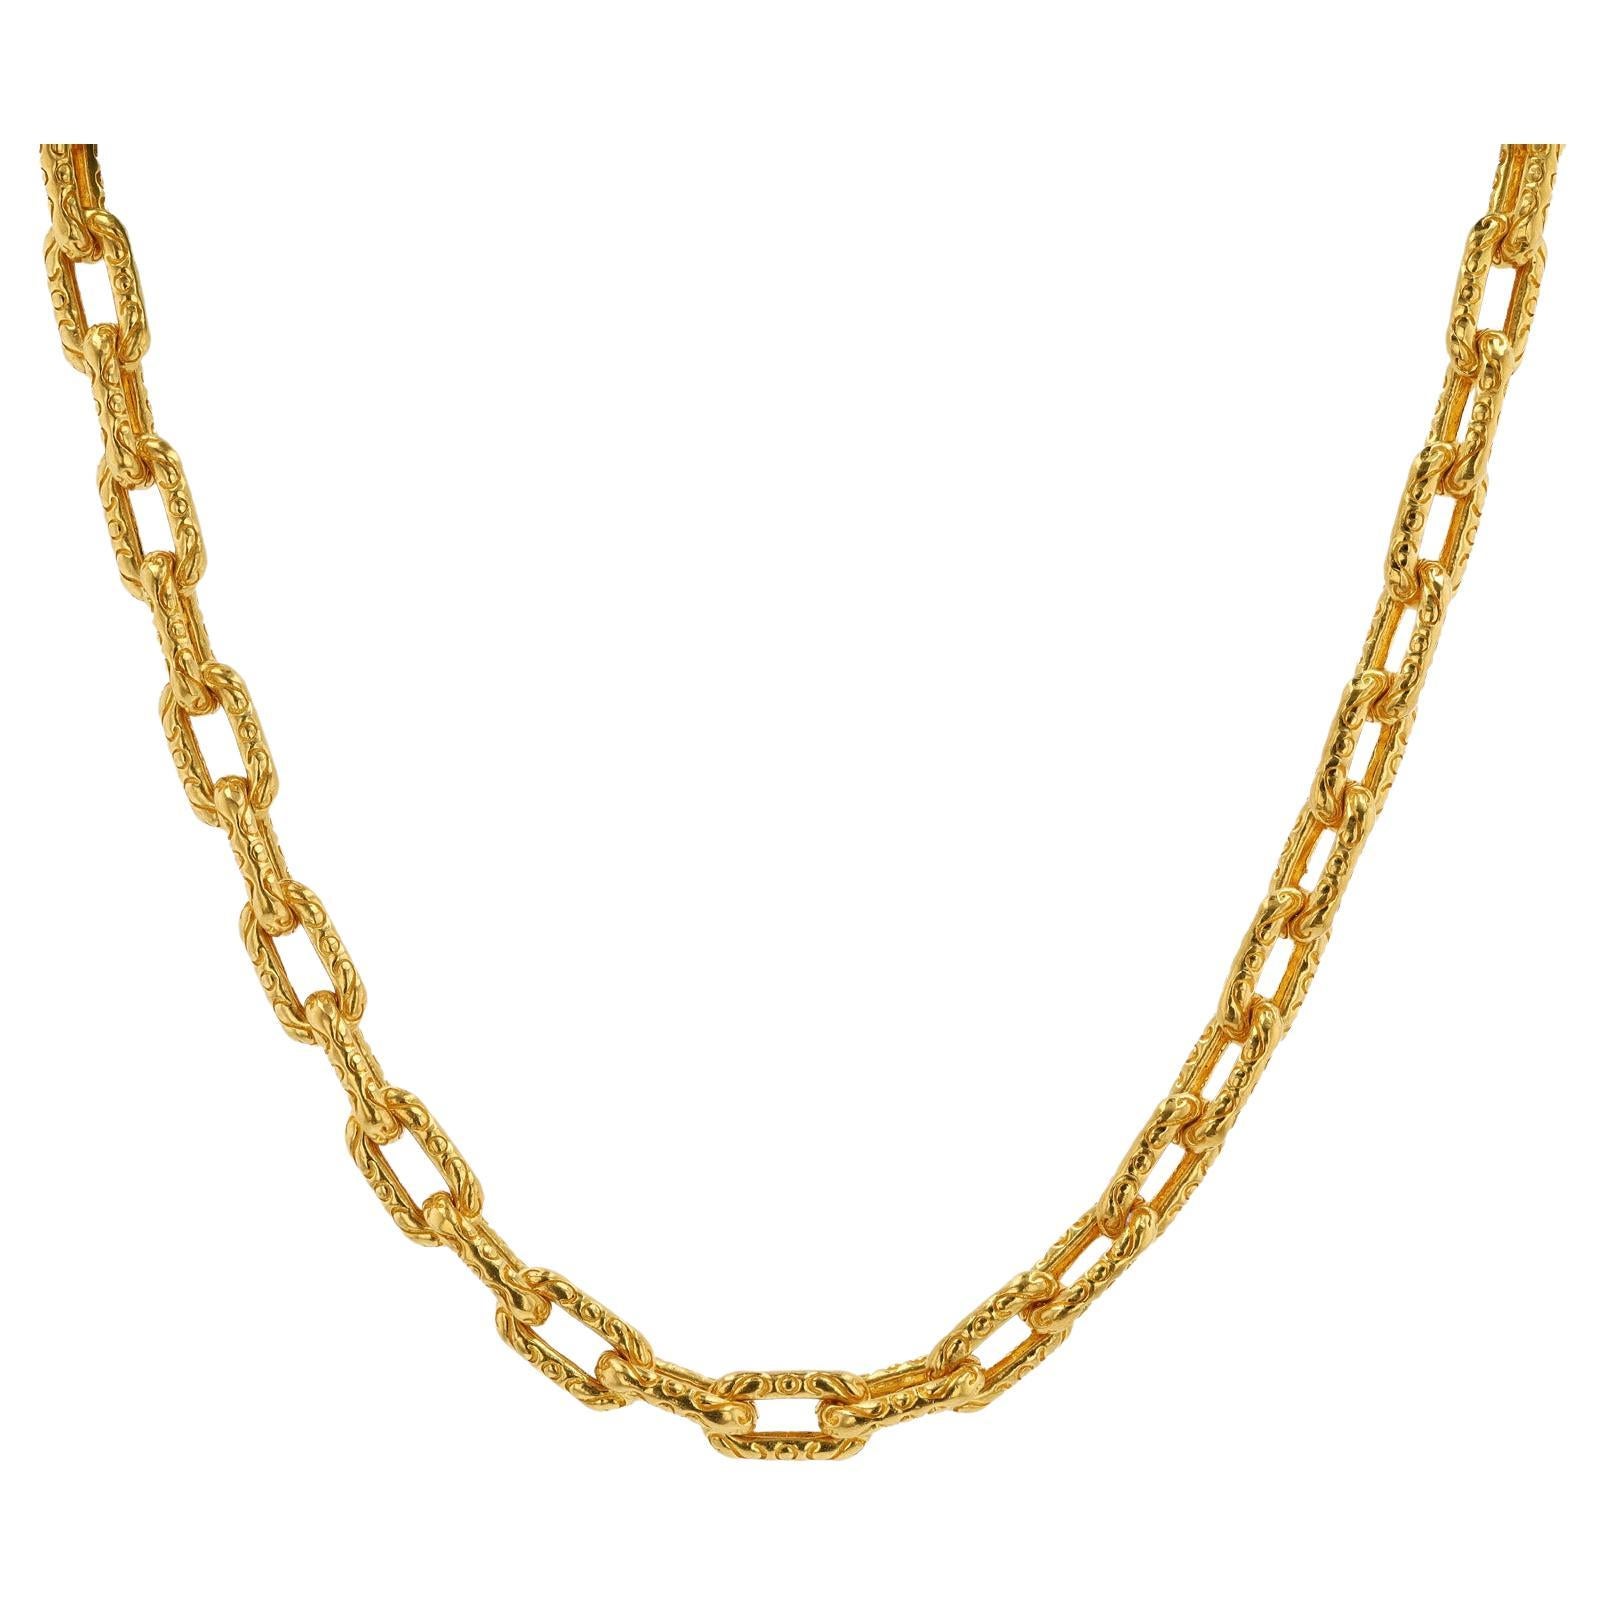 Vintage Heavy 24K Yellow Gold Engraved Chain Link Necklace For Sale